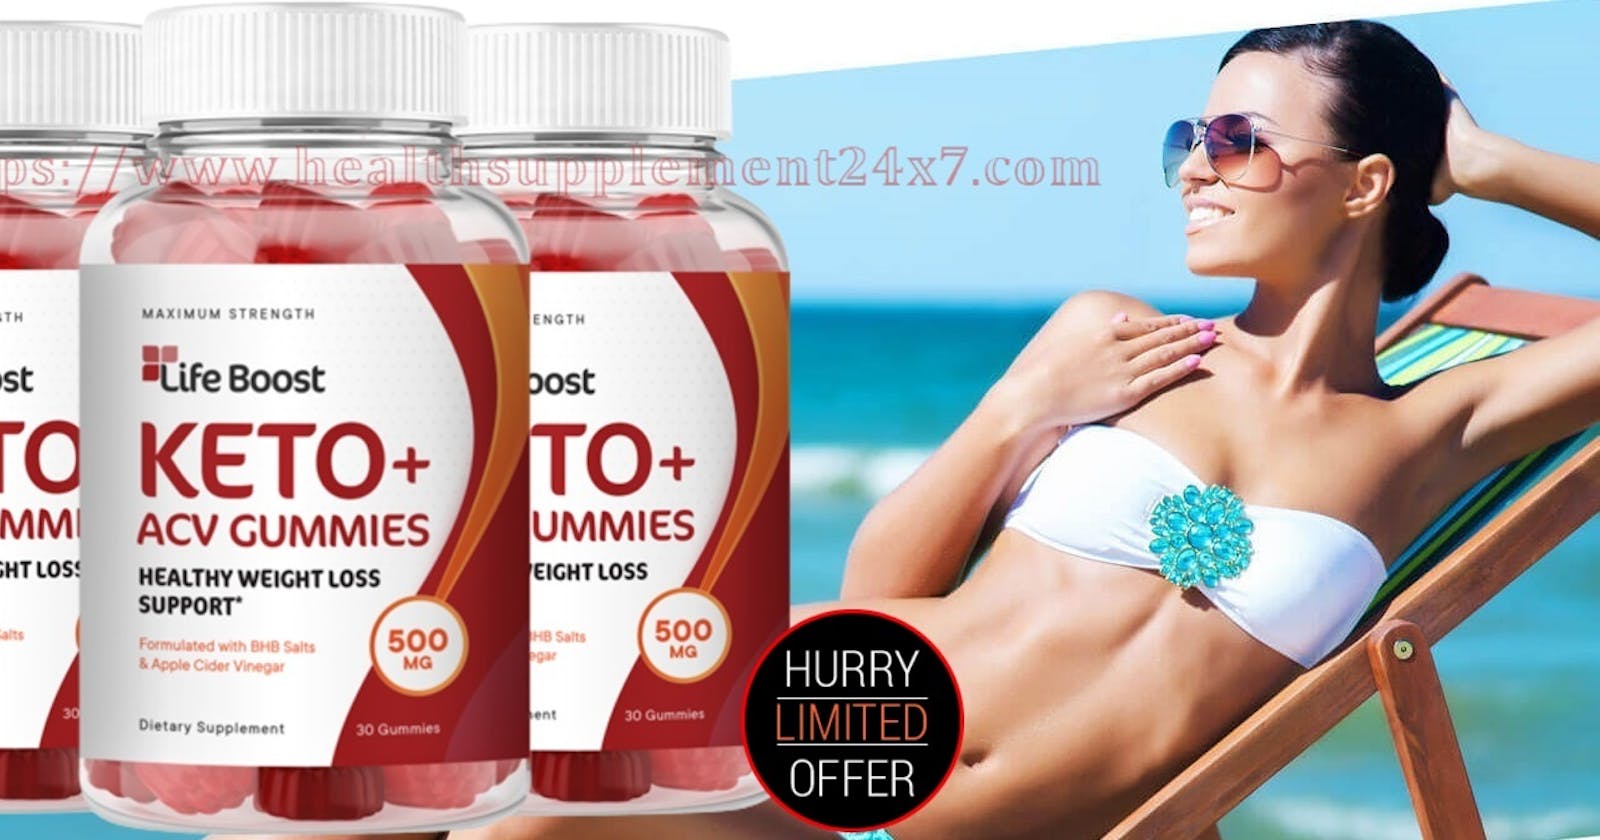 Life Boost Keto + ACV Gummies To Support Metabolism, Fat Burn & Weight Loss [Offer Sale UPTO 60%](Spam Or Legit)